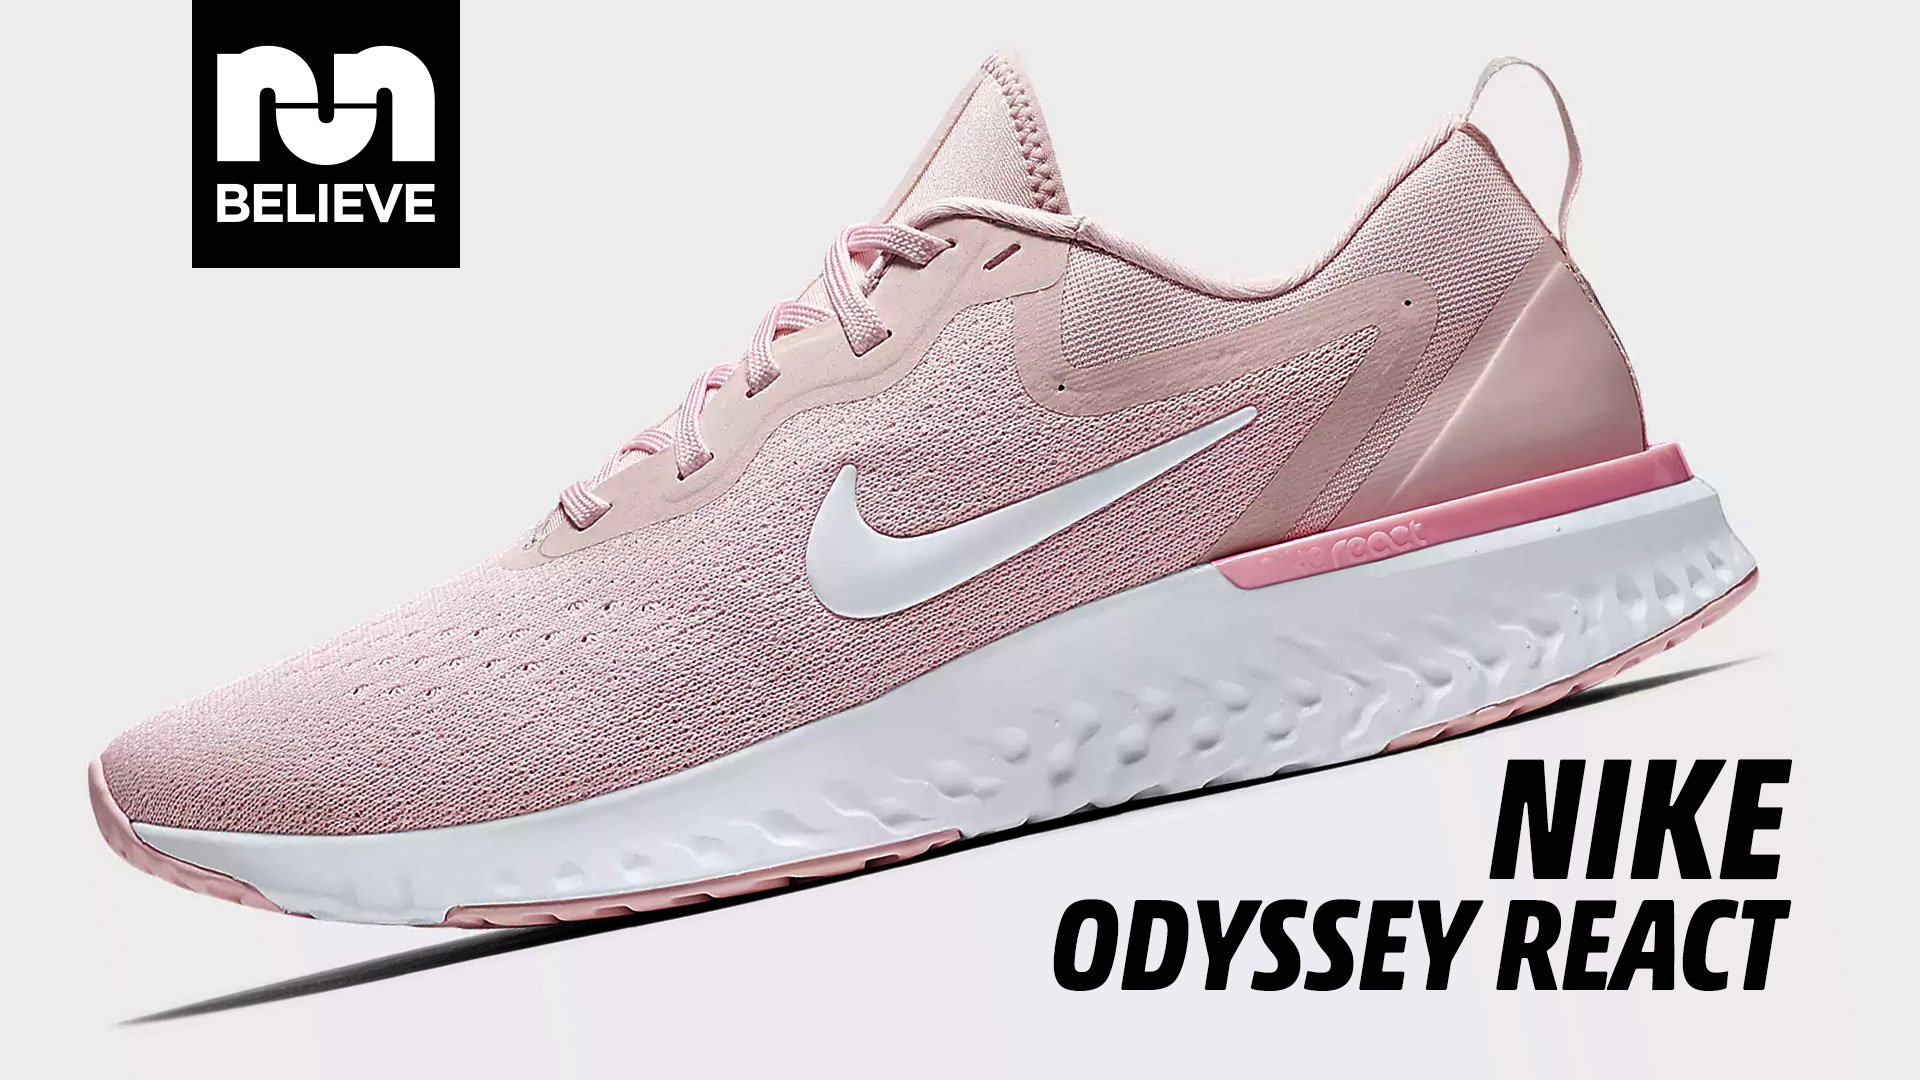 Nike Odyssey React Video Performance Review » in Run